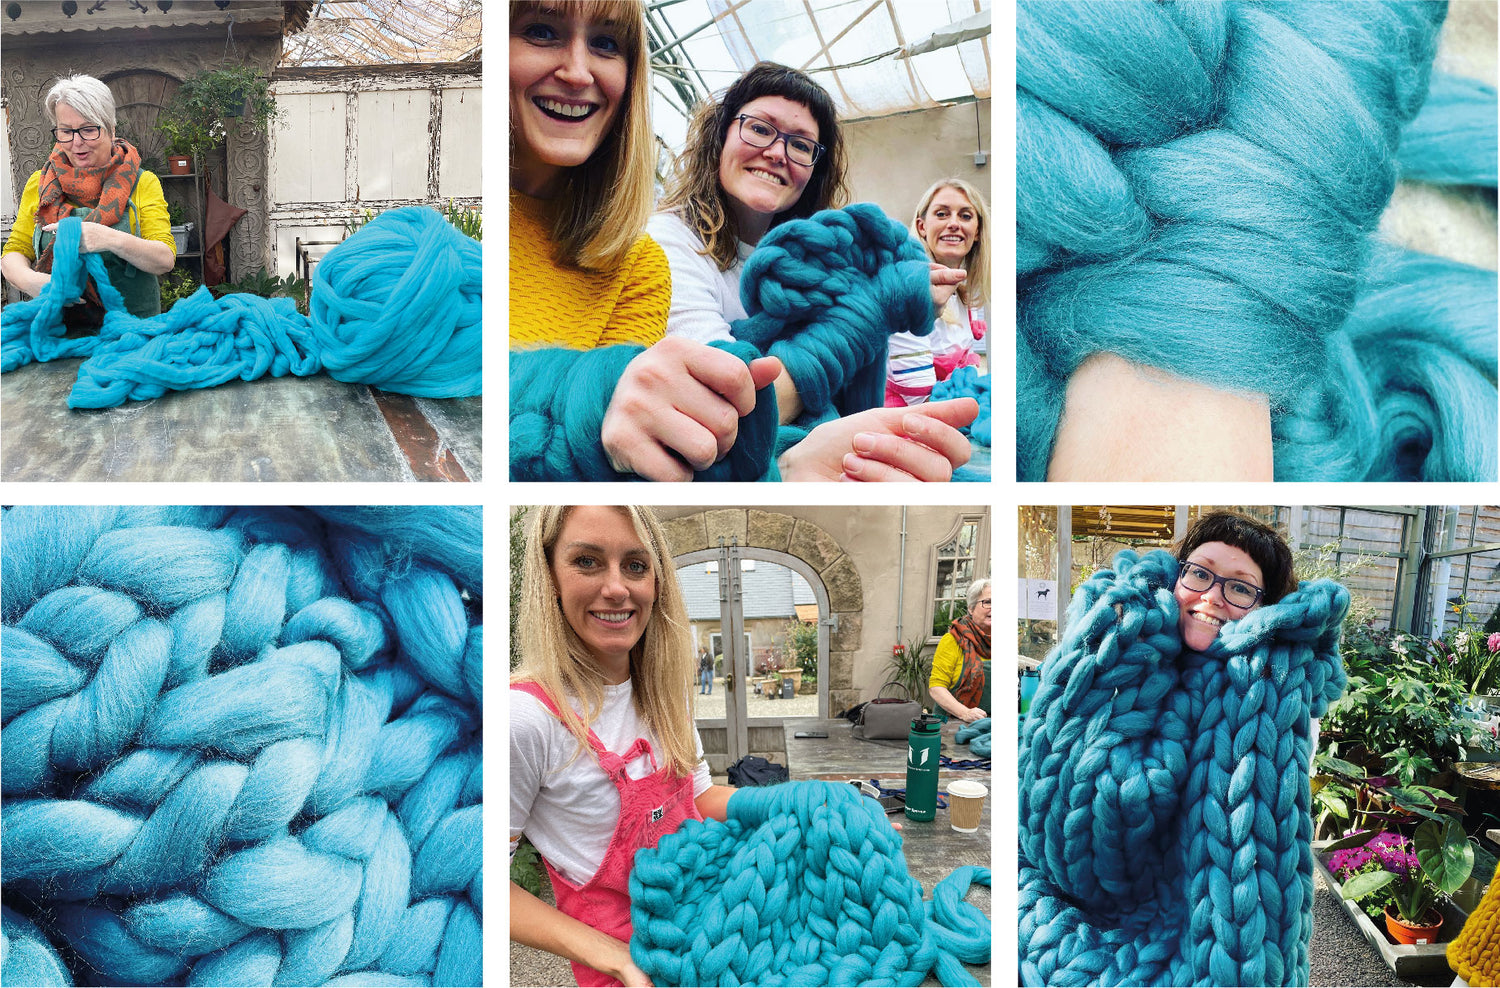 6 photos showing the arm knitting process. Ally unravelling a giant ball of wool, Fi and Becs with the wool on their arms, Danit Hope holding up her nearly finished blanket, and Fi woodhead happily showing her finished chunky knit blanket